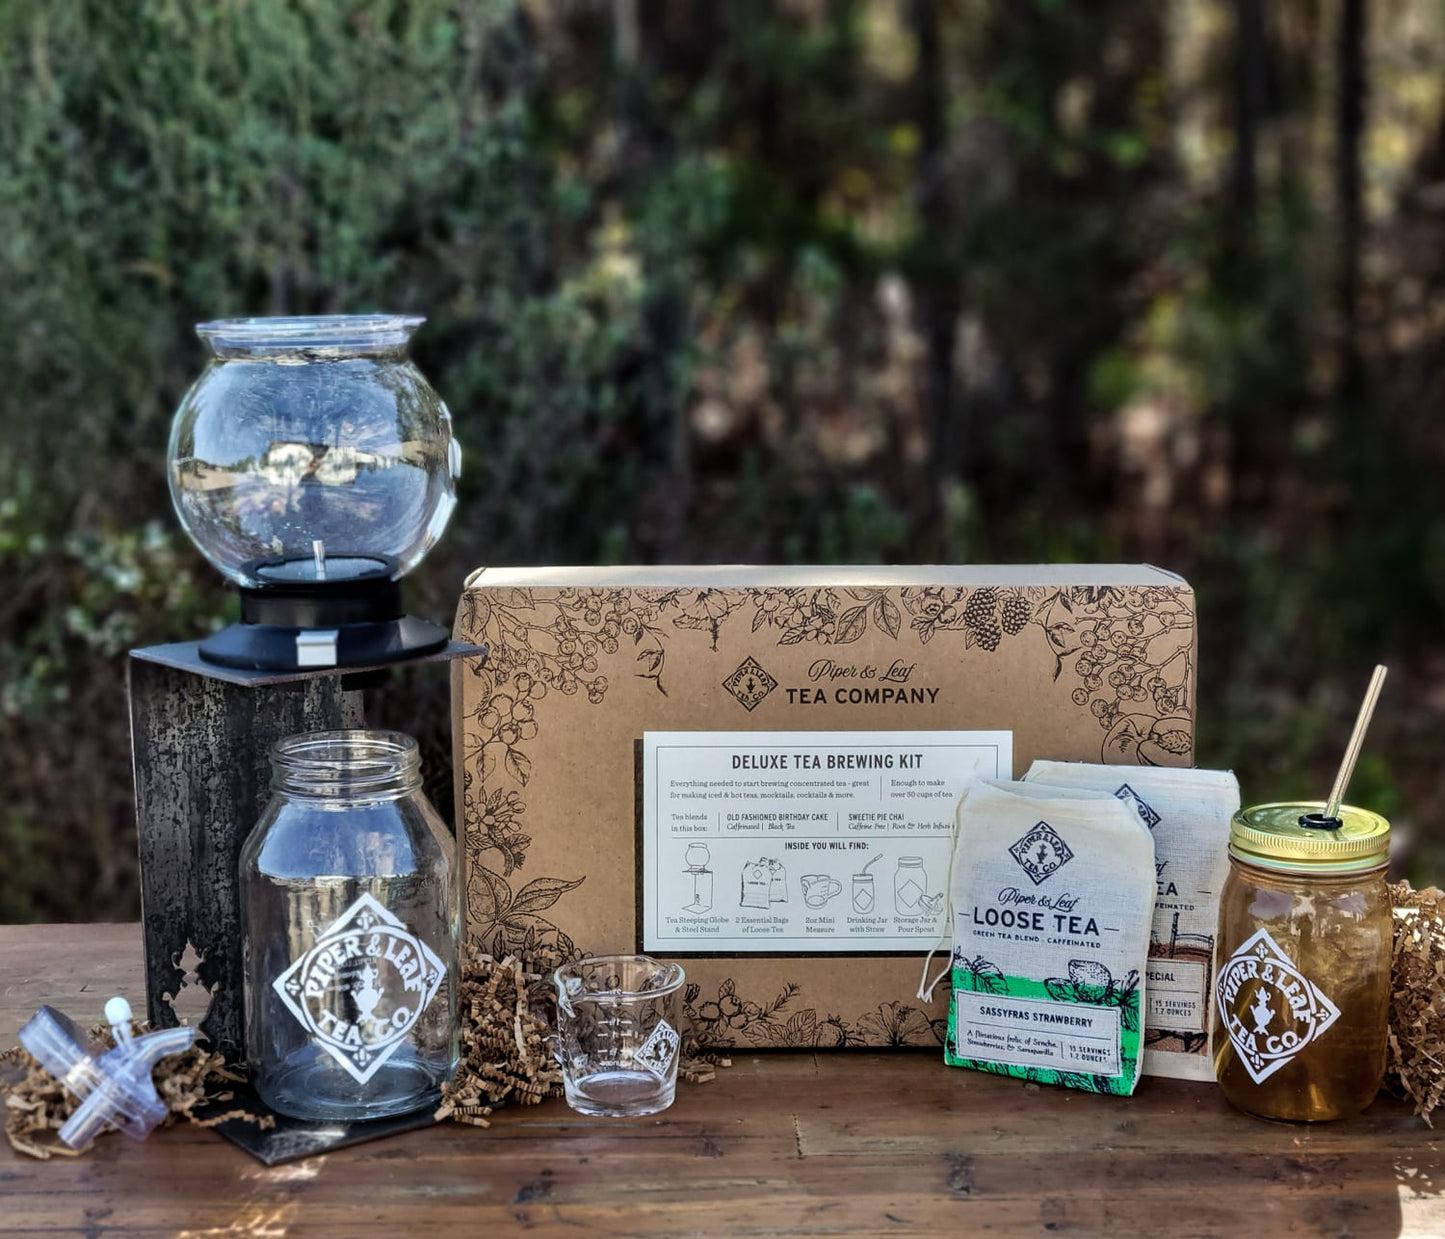 A Deluxe Piper Brew Kit from Piper & Leaf Tea Co. and a jar of honey on a wooden table with a hint of Concentrated Tea.